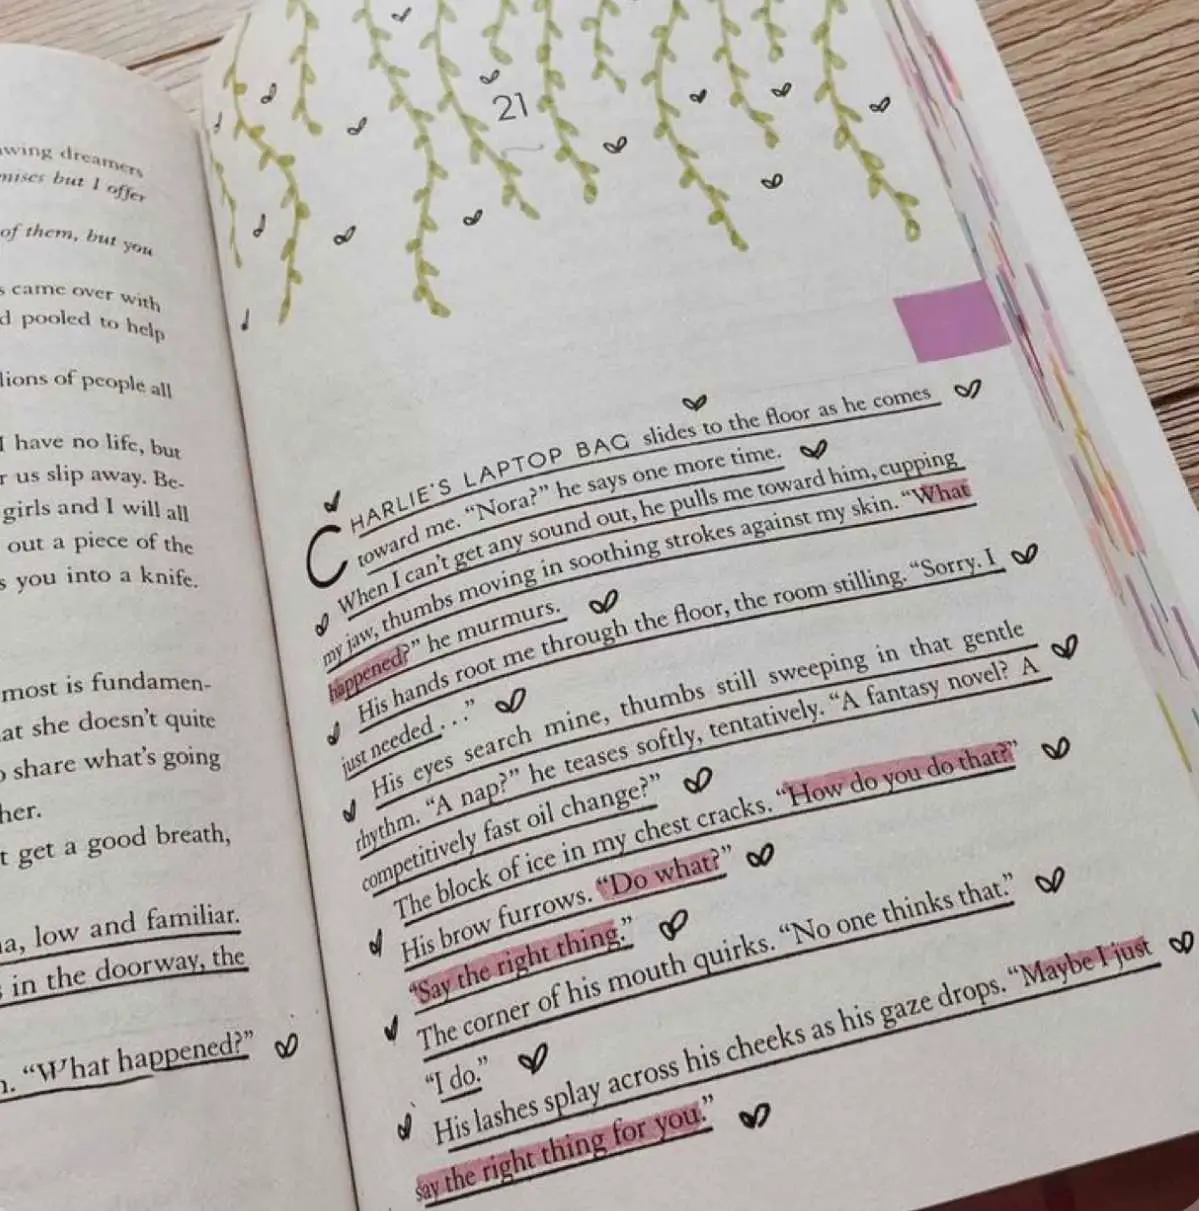 How to Annotate a Book - Barely Bookish